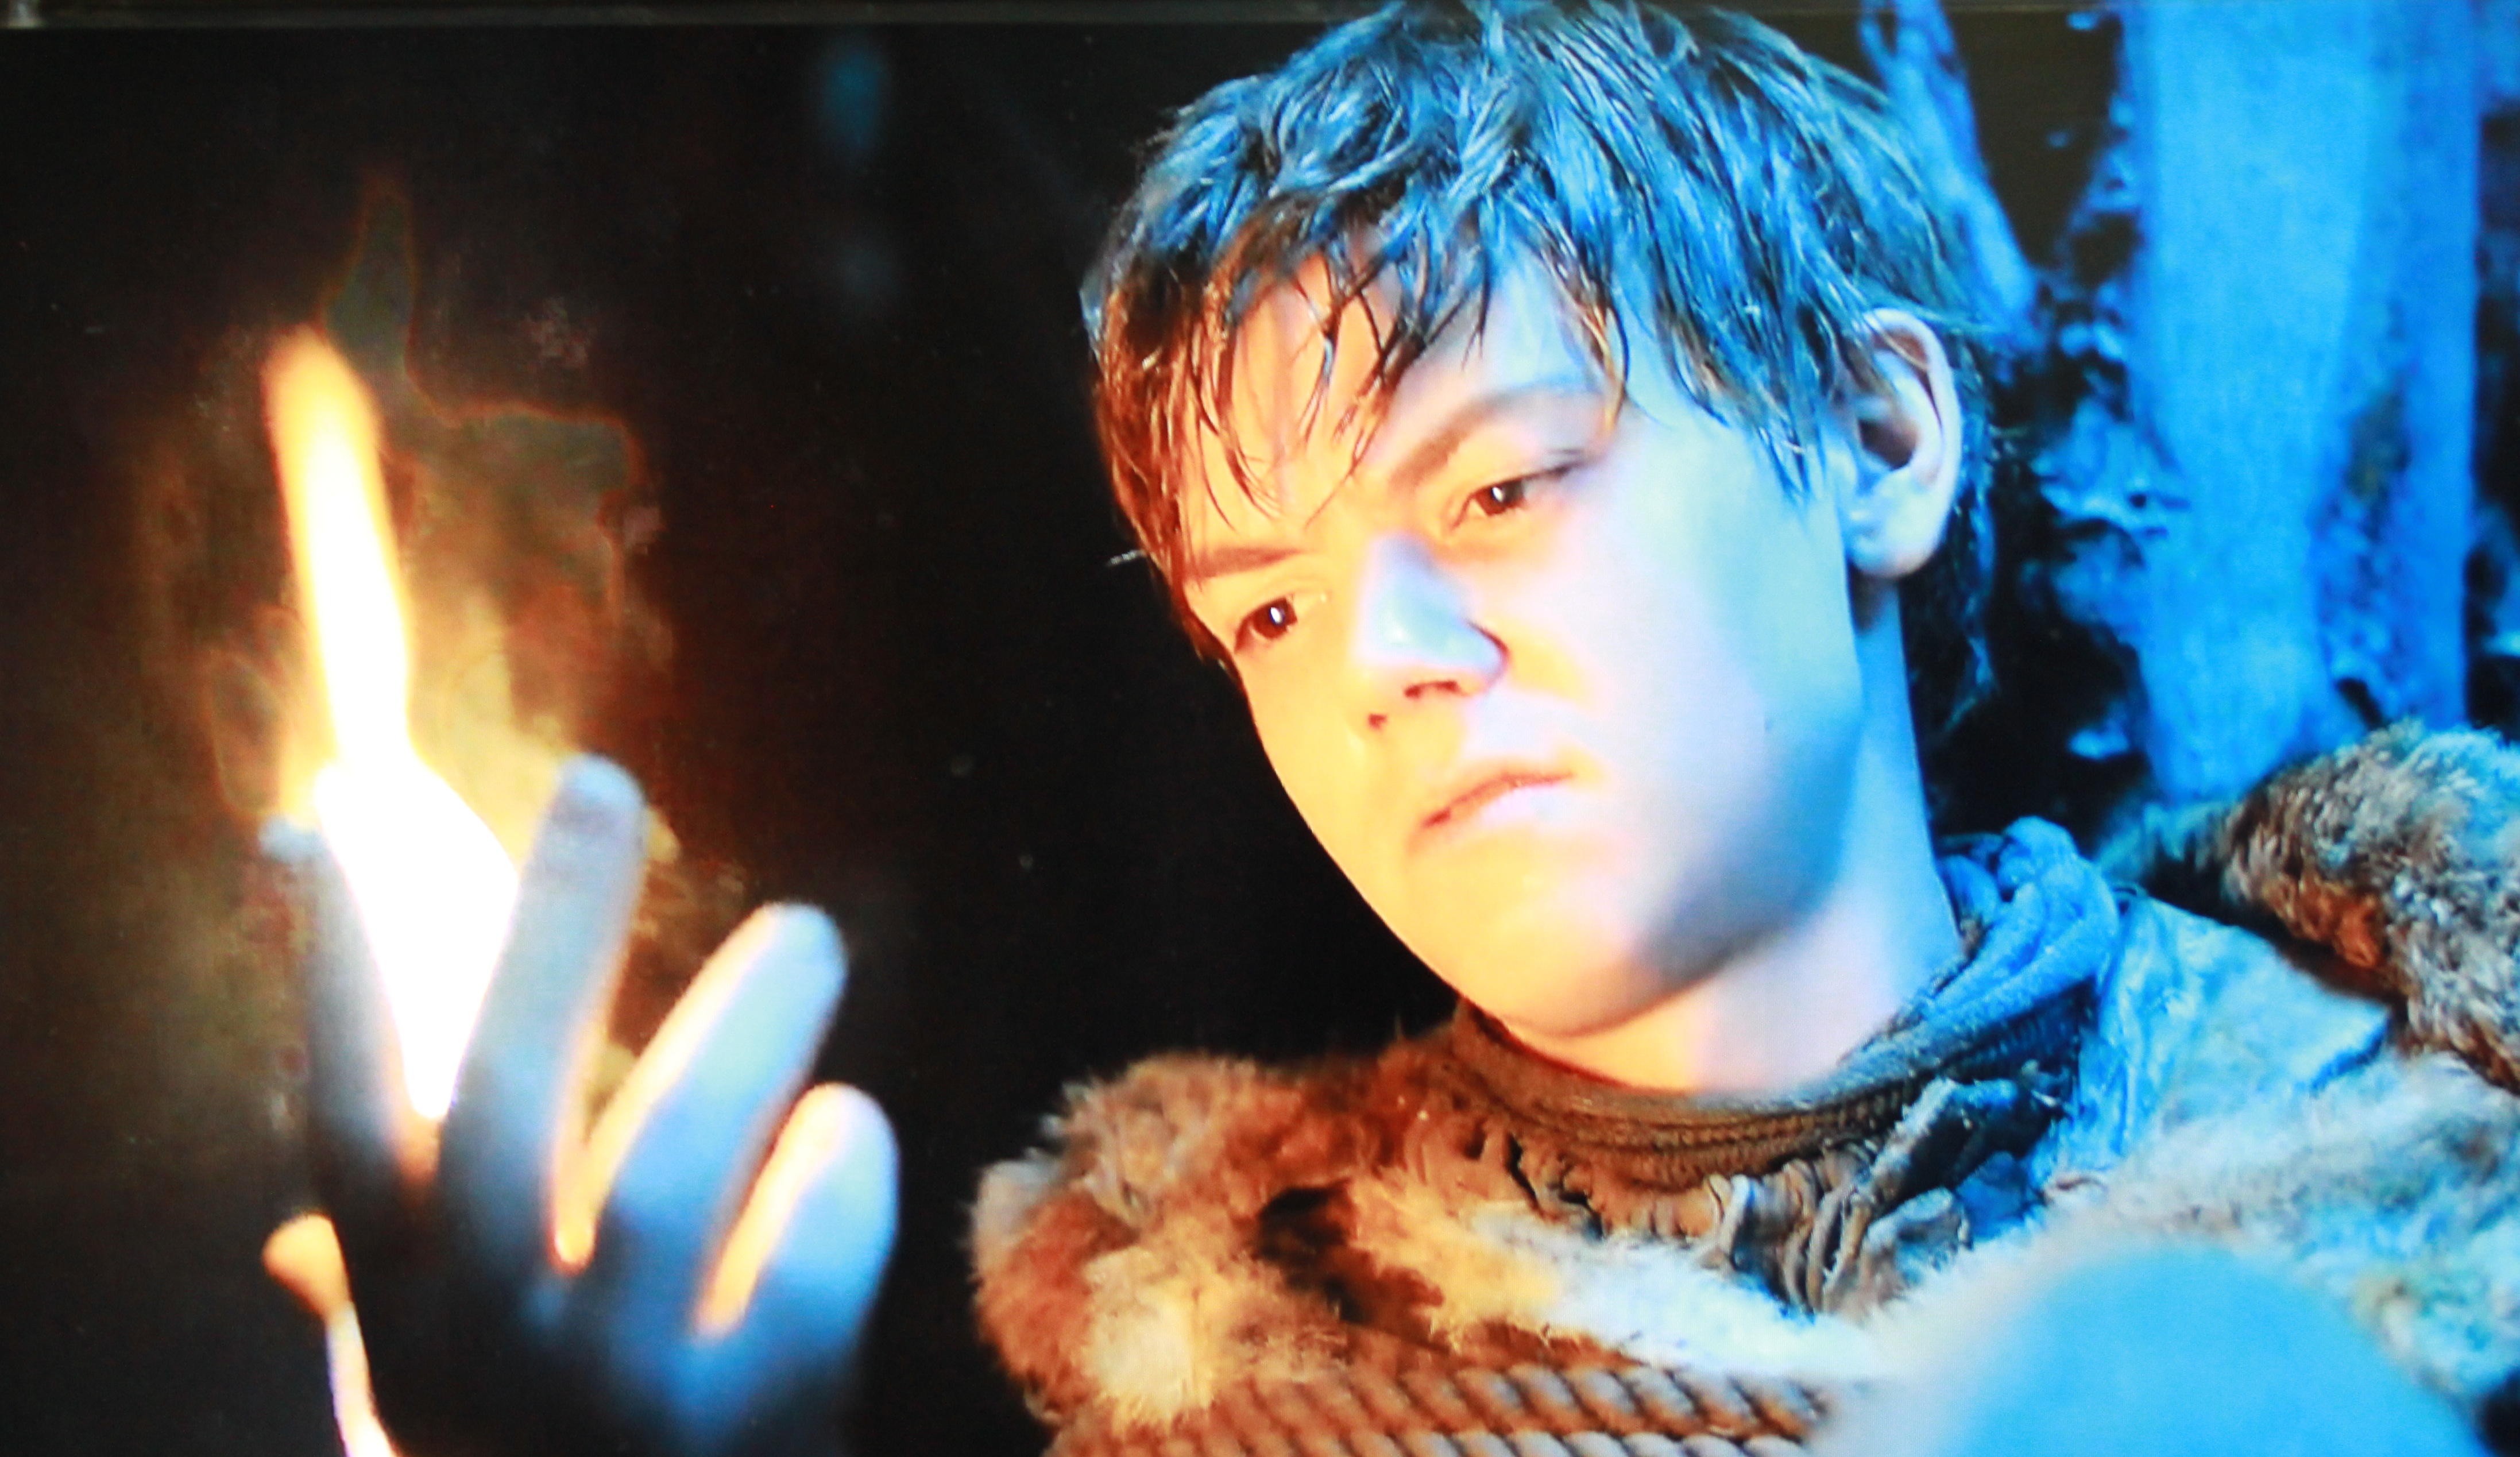 Thomas Sangster in Game of Thrones